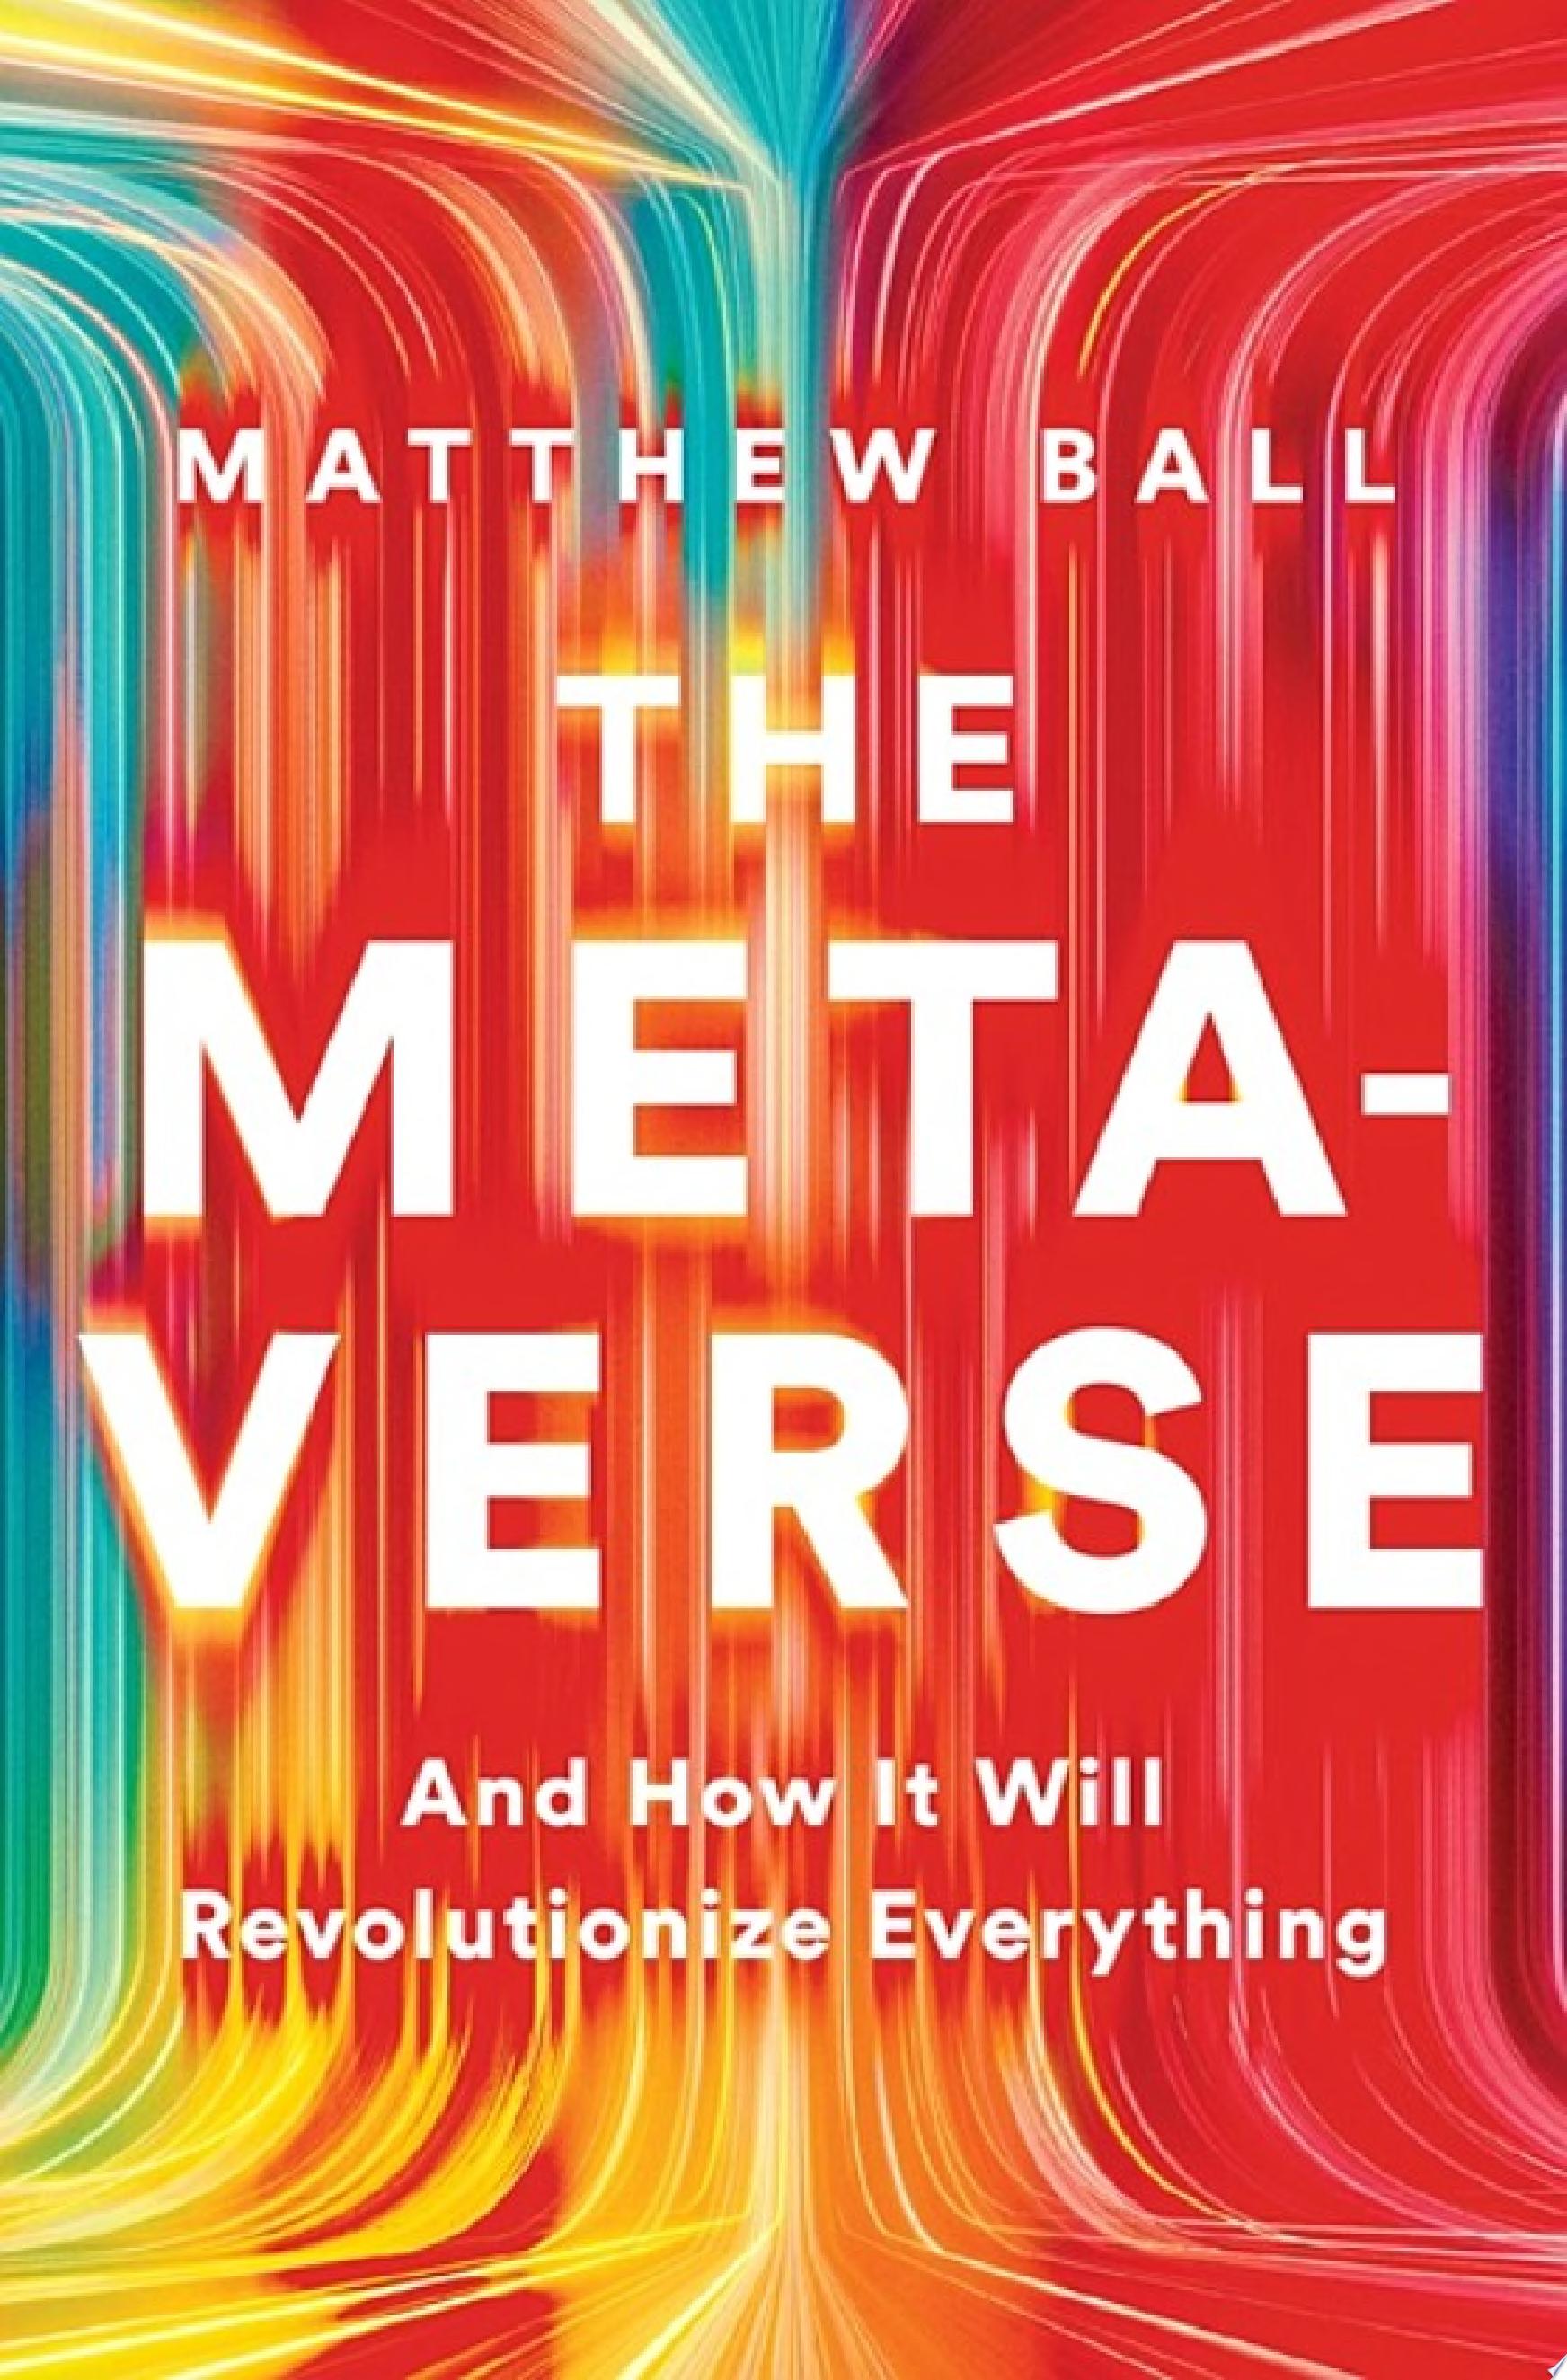 Image for "The Metaverse: And How it Will Revolutionize Everything"